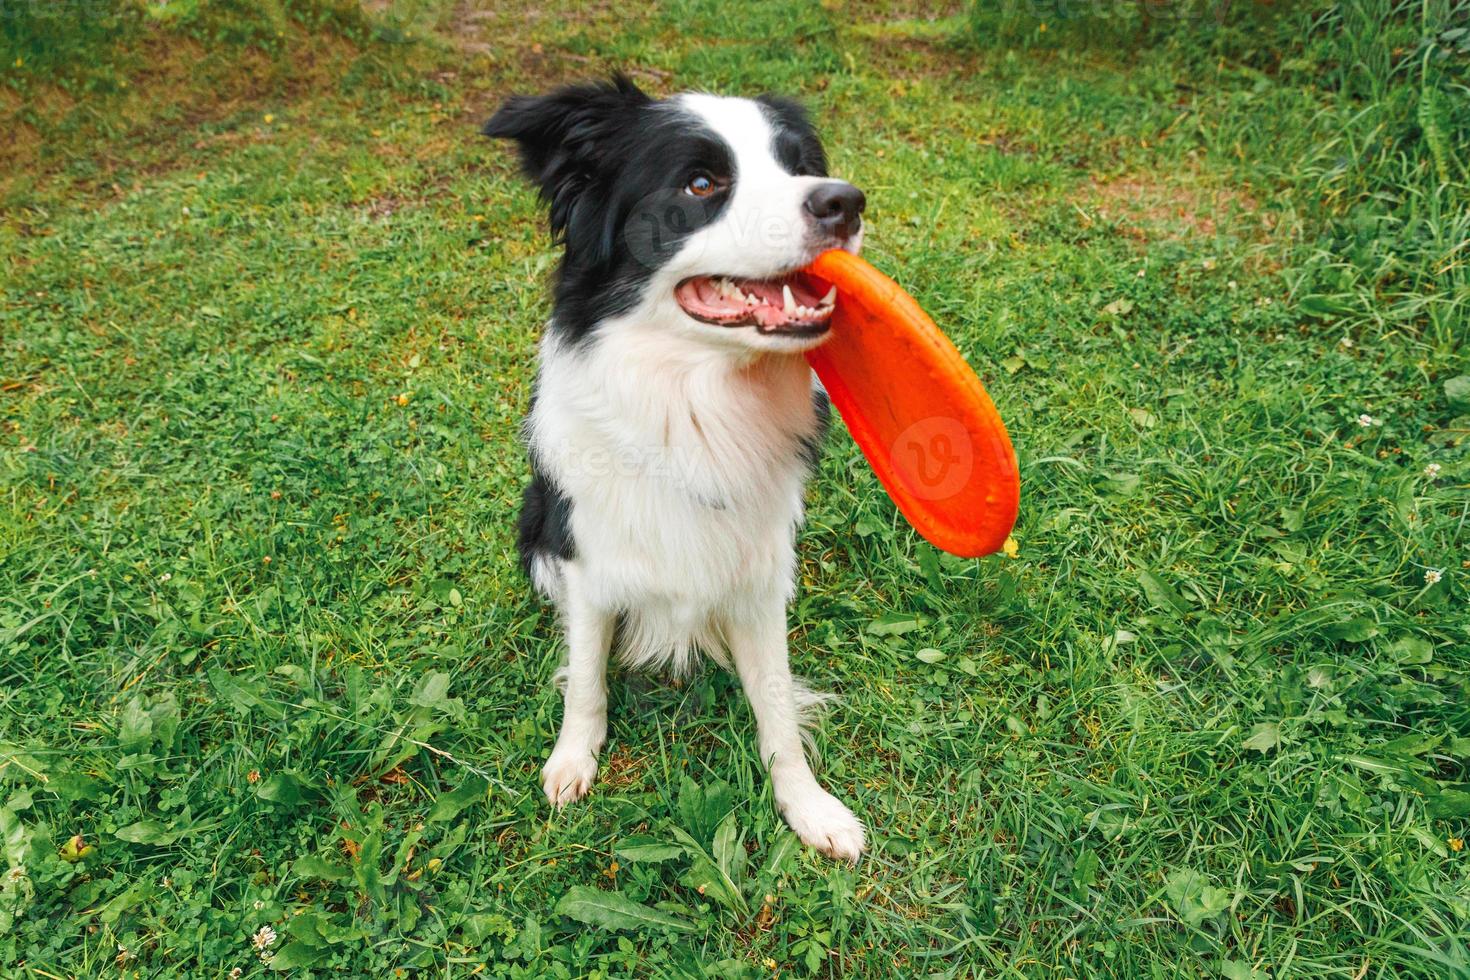 Outdoor portrait of cute funny puppy dog border collie catching toy in air. Dog playing with flying disk. Sports activity with dog in park outside. photo